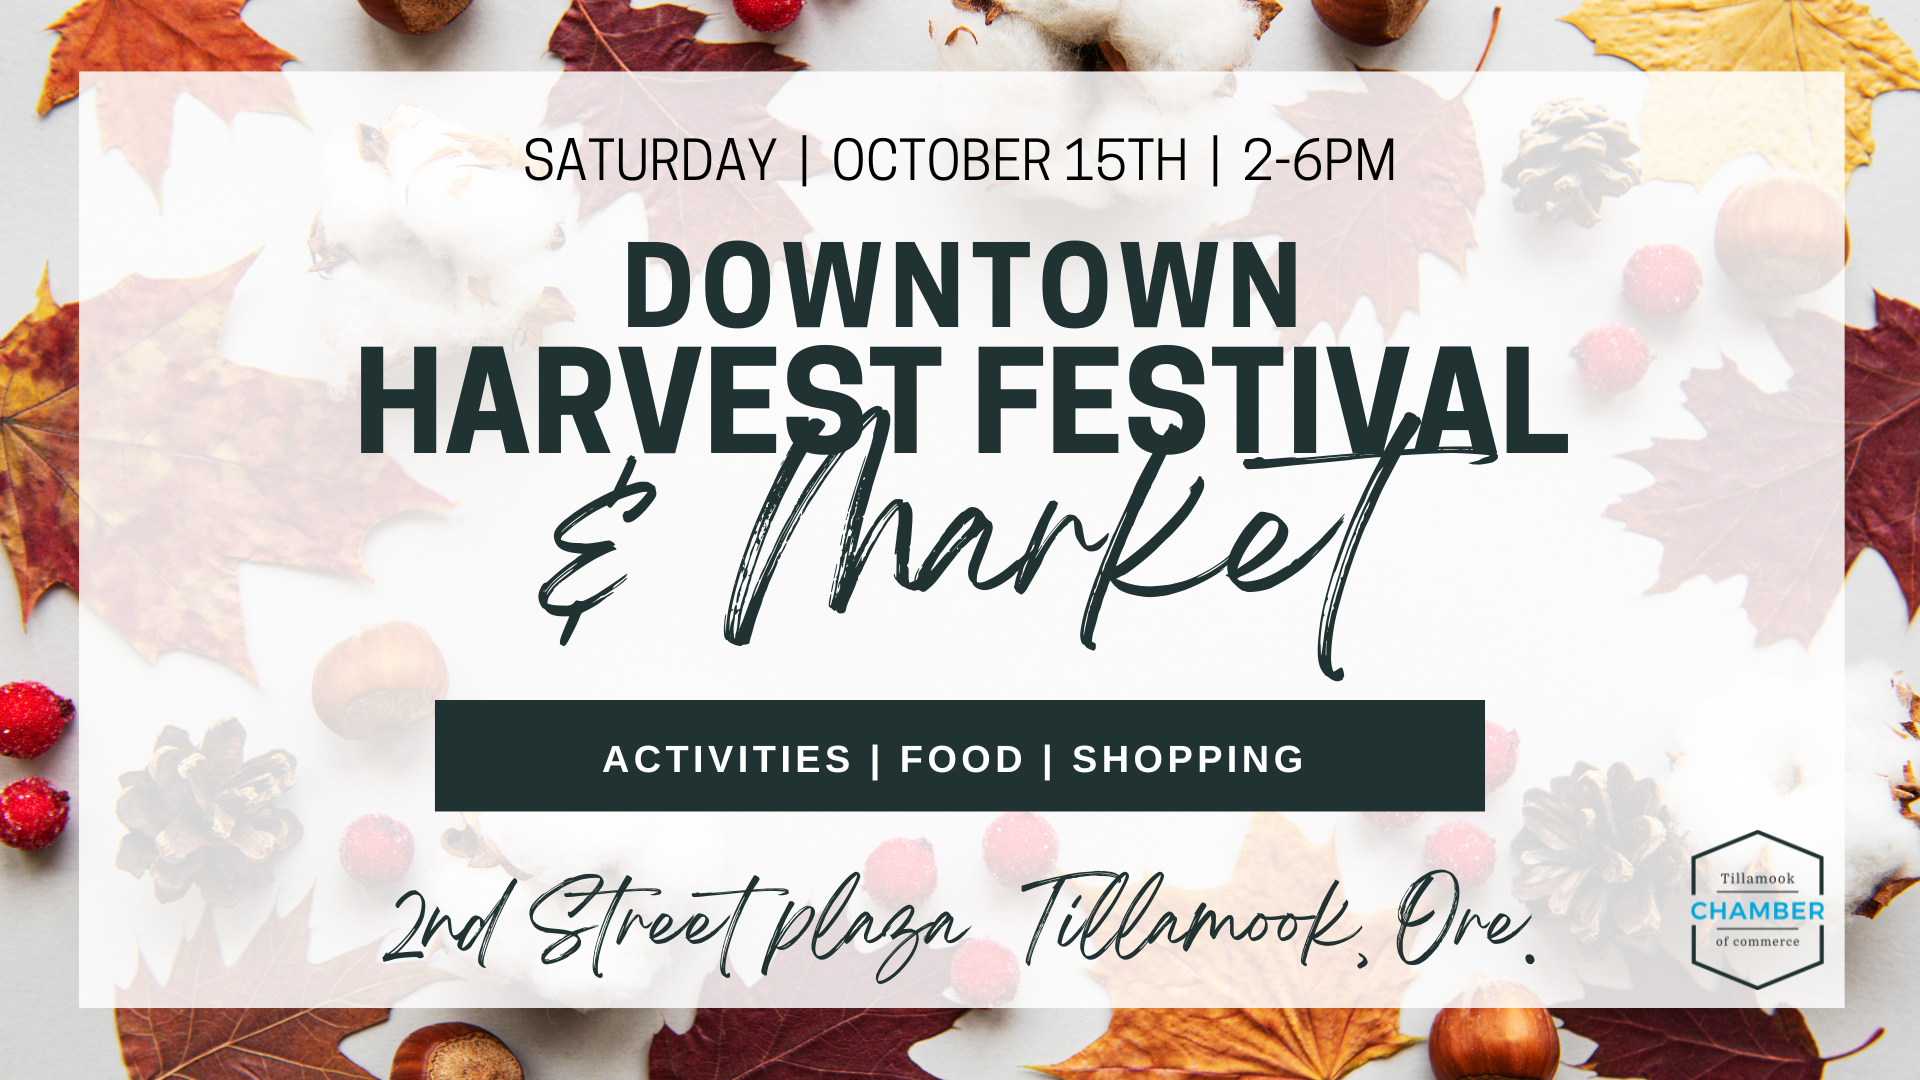 Tillamook Downtown Harvest Festival and Market, October 15, 2 to 6 p.m. at the Second Street Plaza